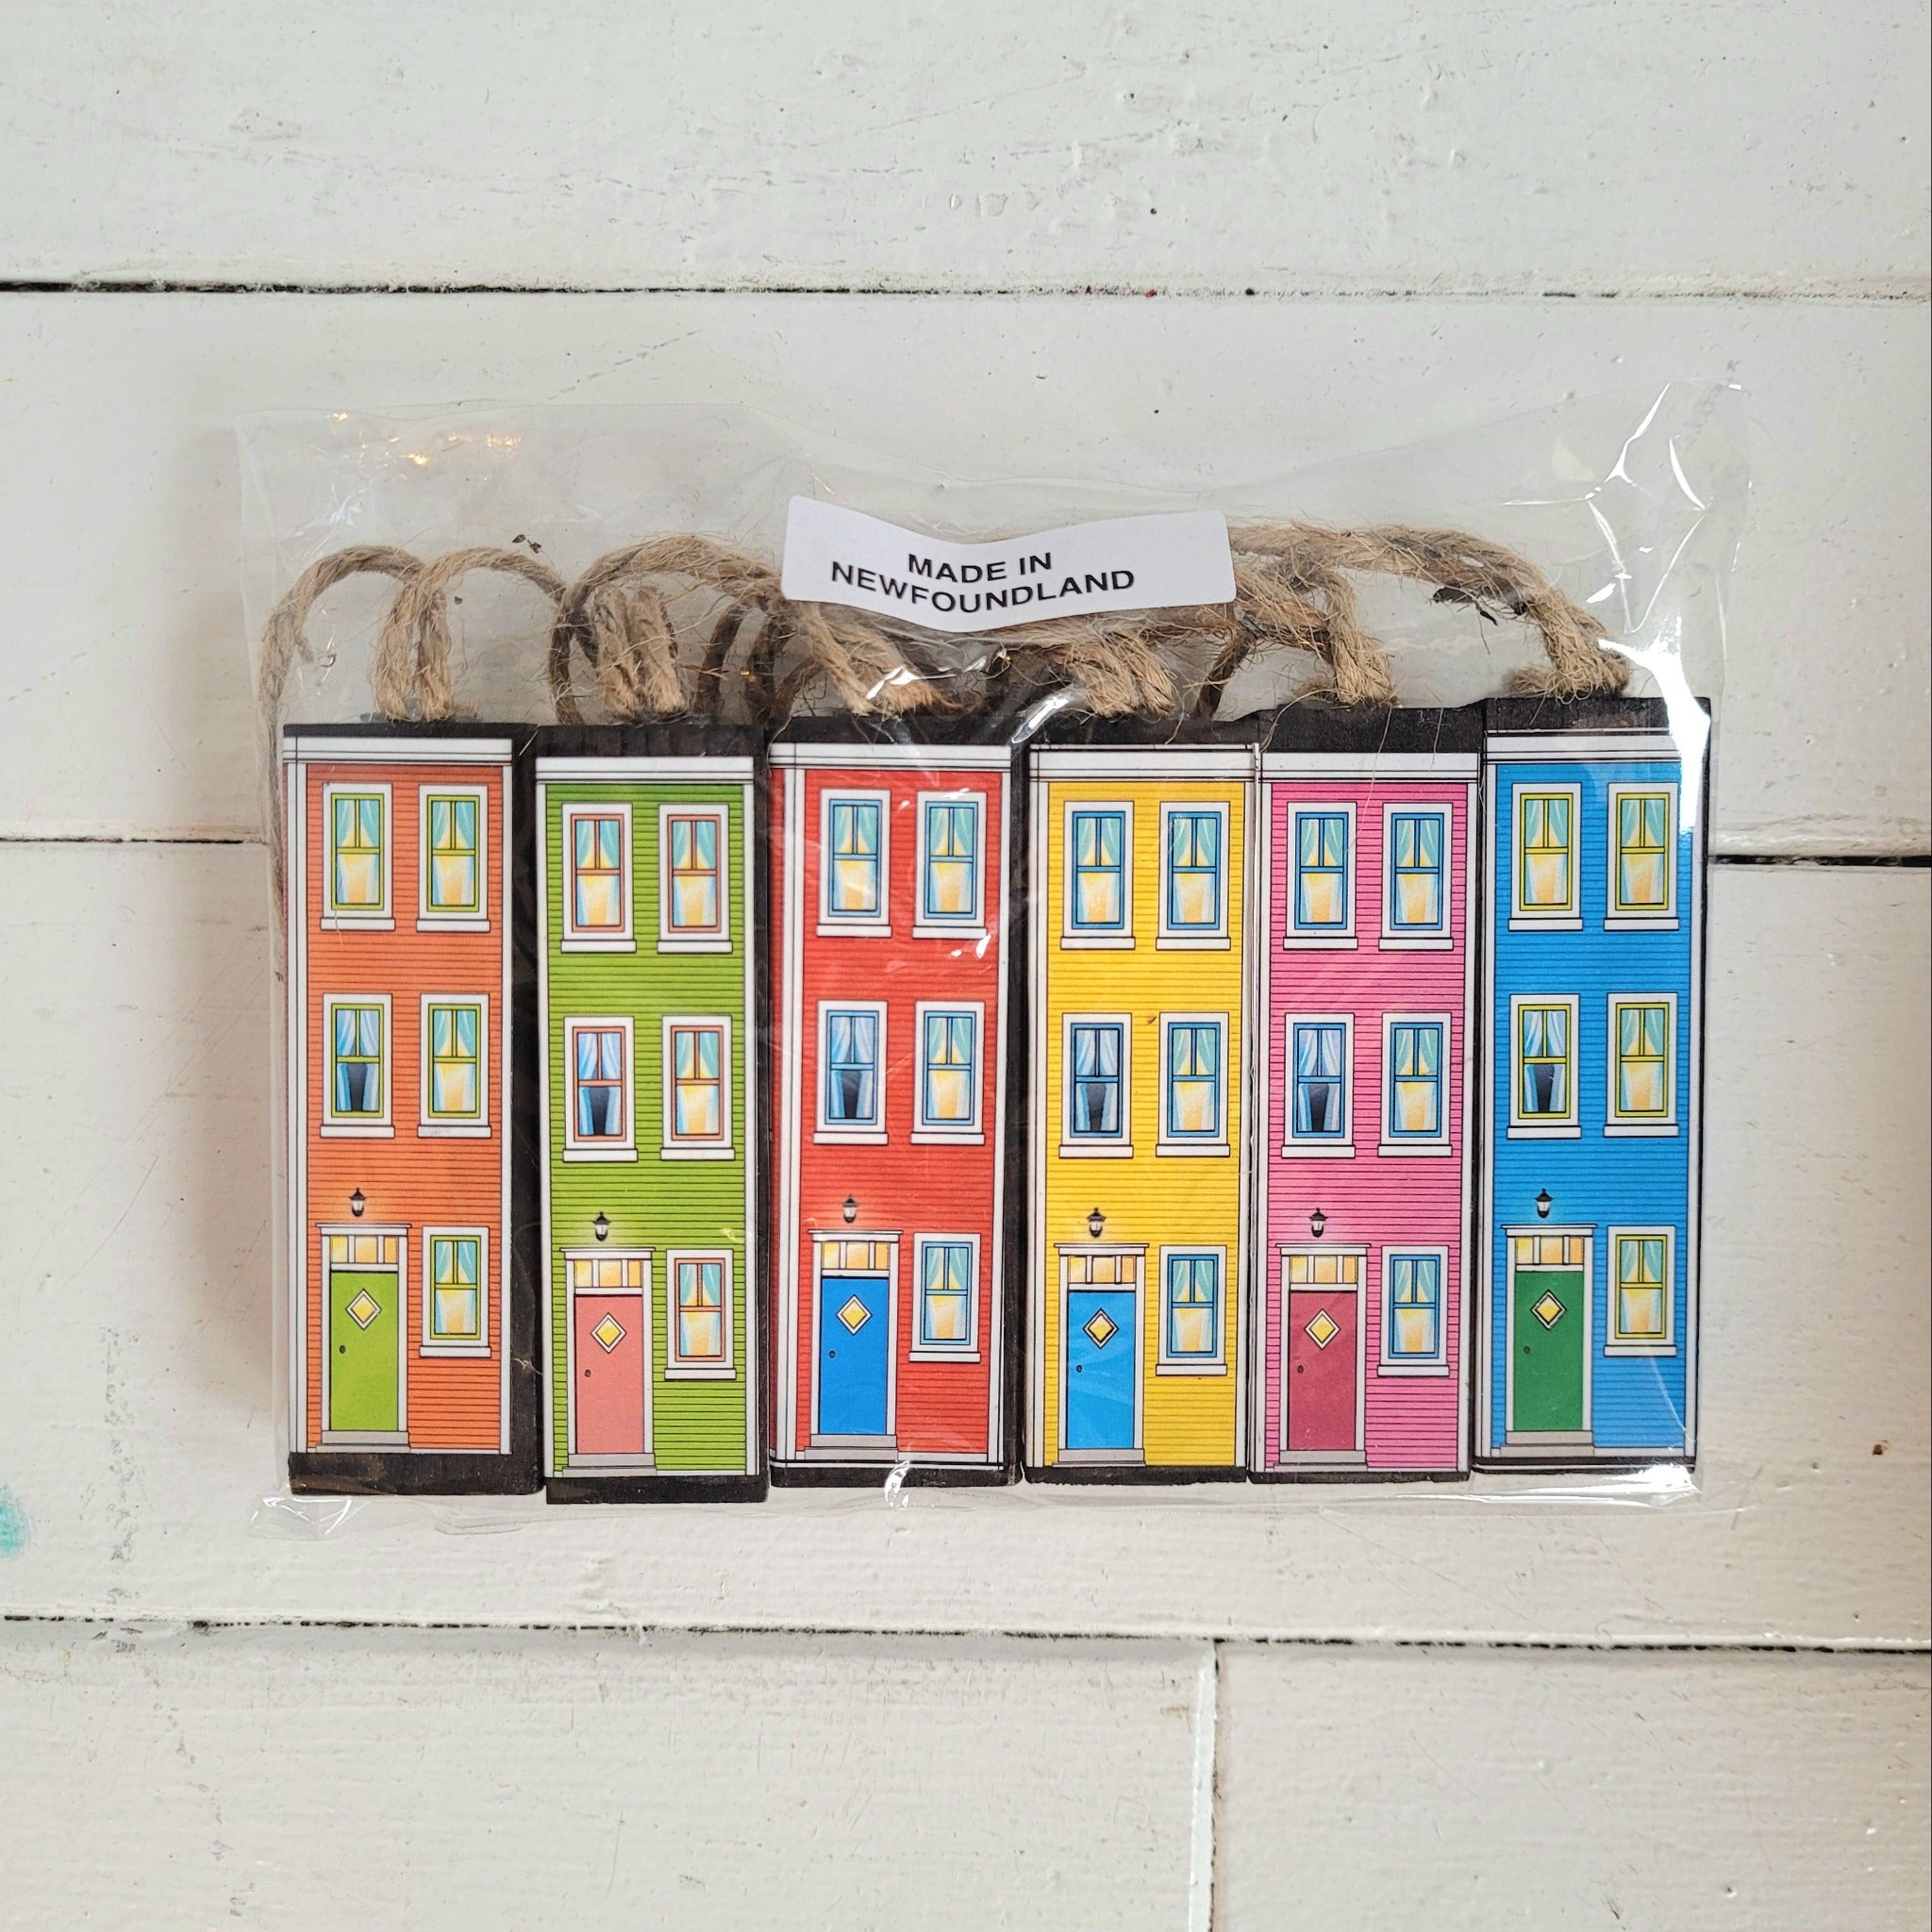 six tree ornaments of colorful rowhouse designs of Kings Road. Made in St. John's, Newfoundland.